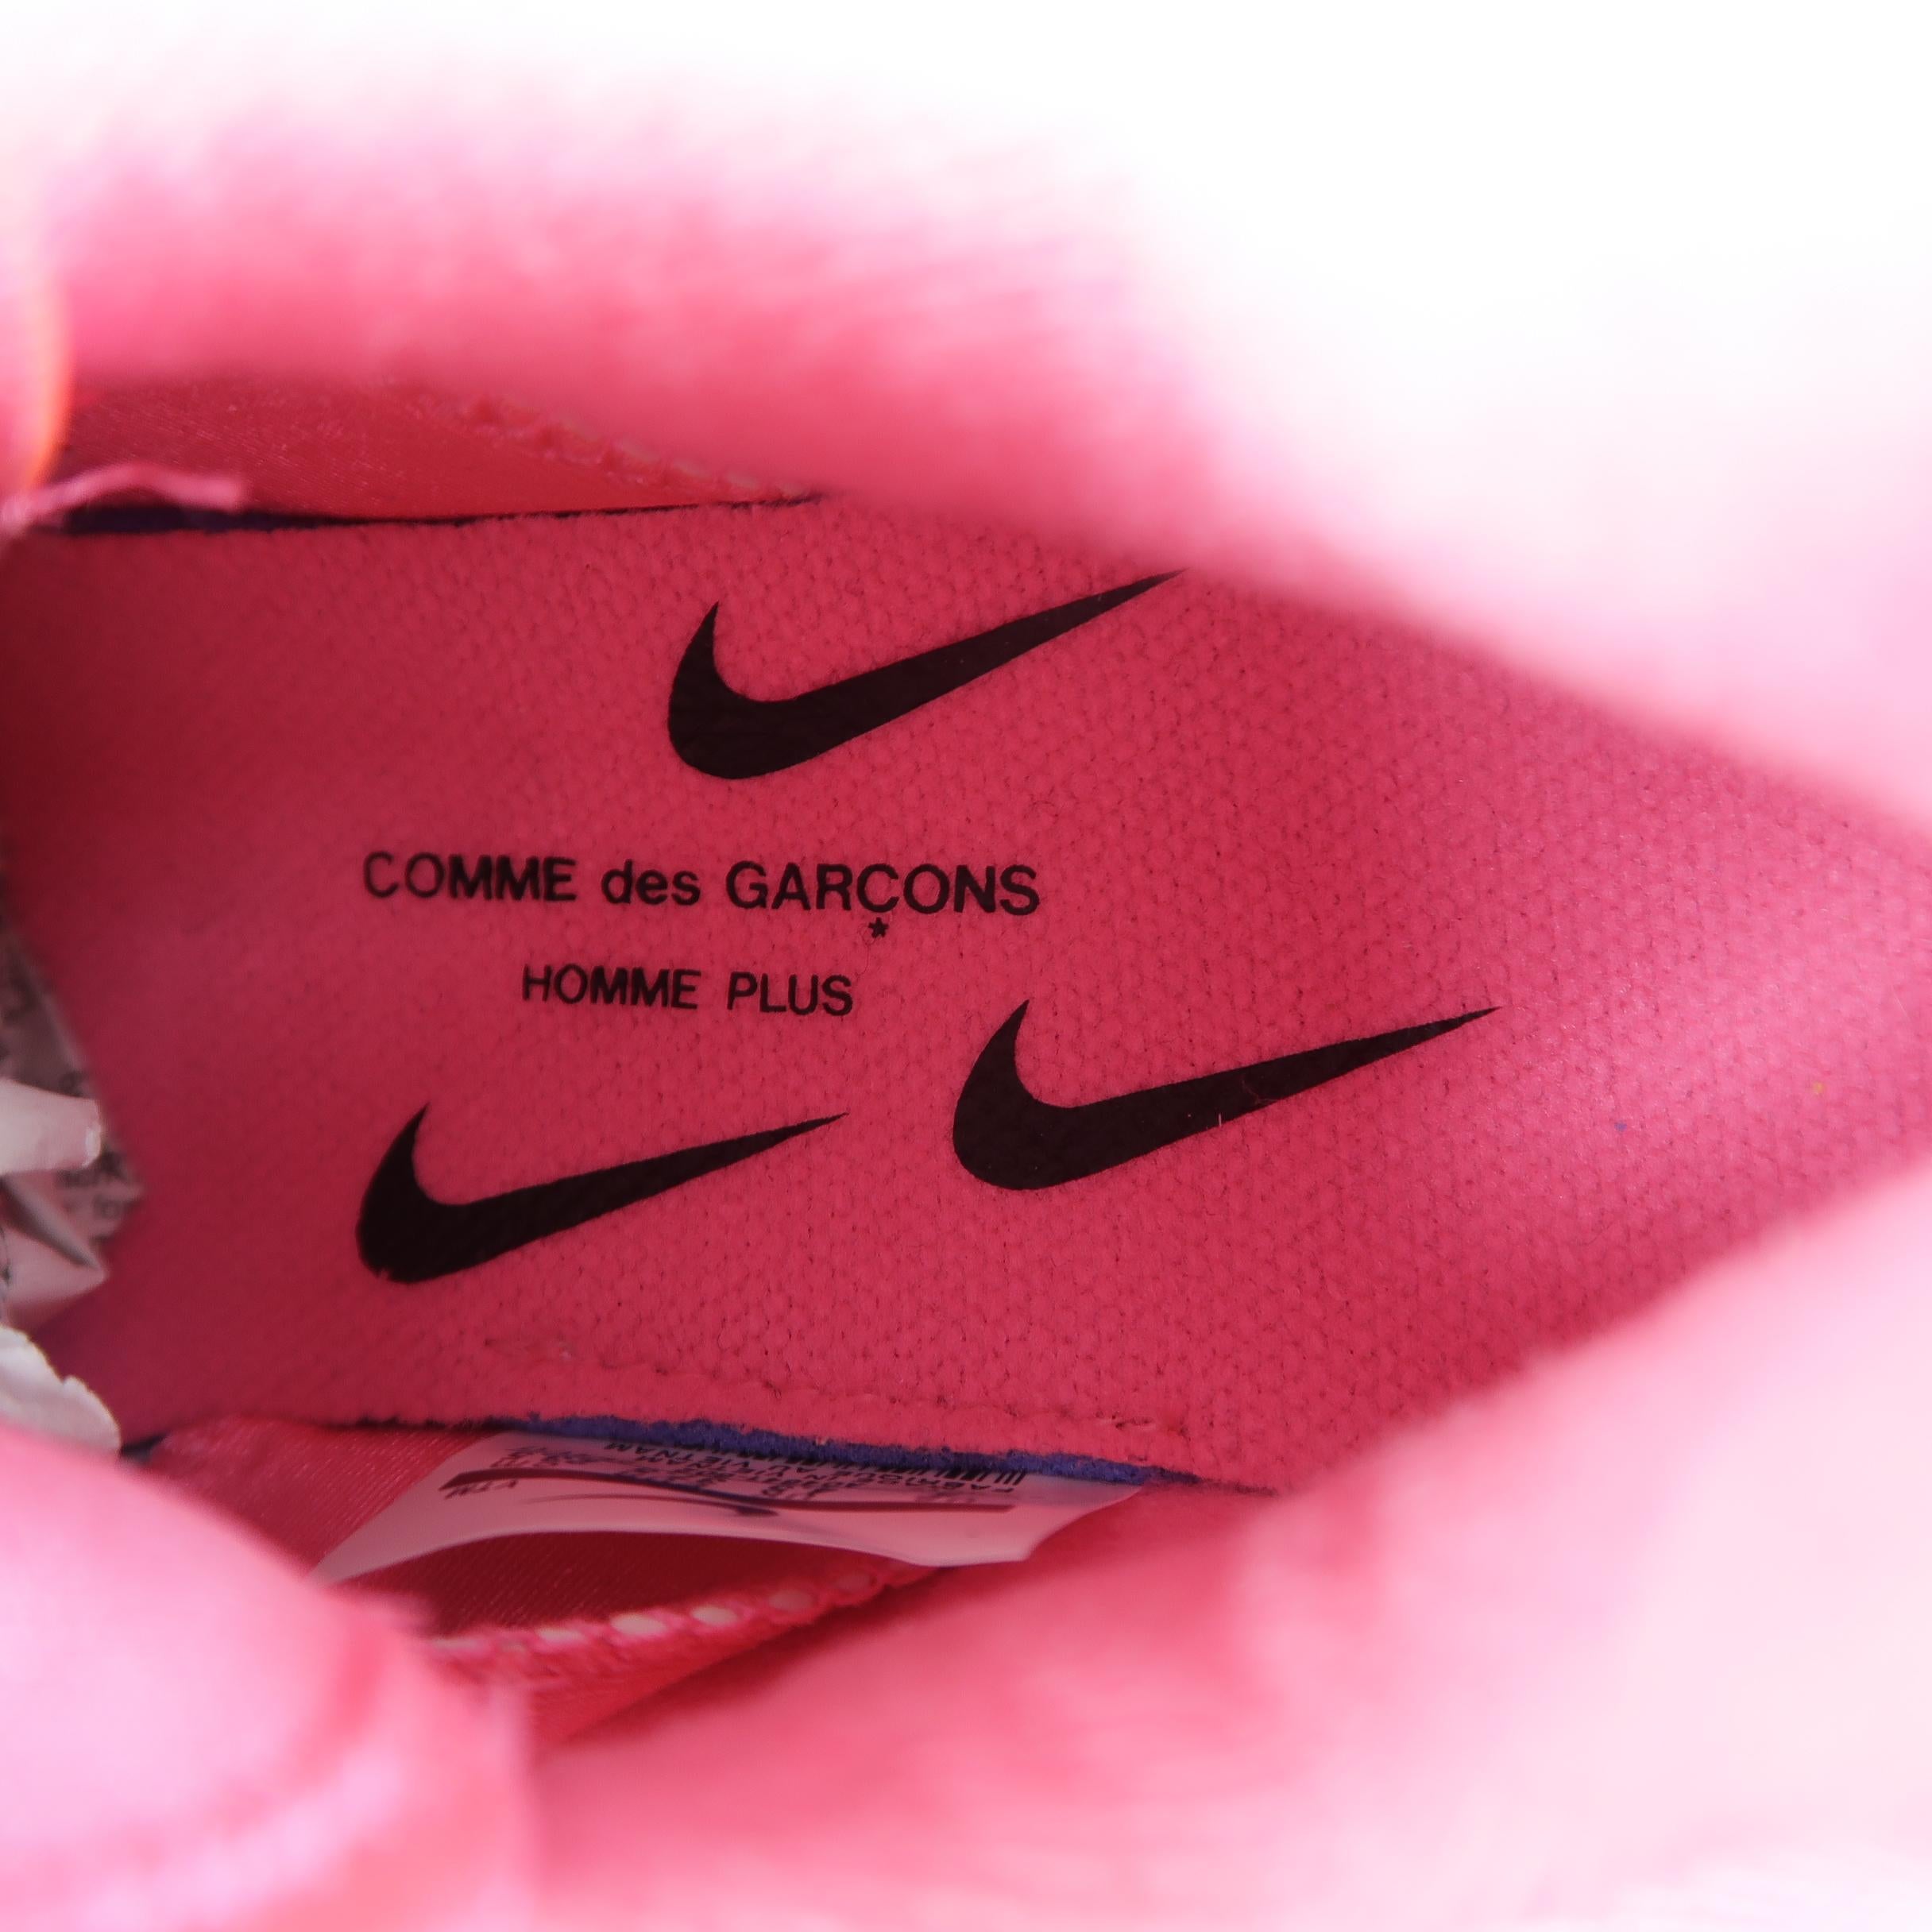 COMME des GARCONS Nike Size 5.5 Neon Pink Nylon Air Max 180 Sneakers Trainers 3